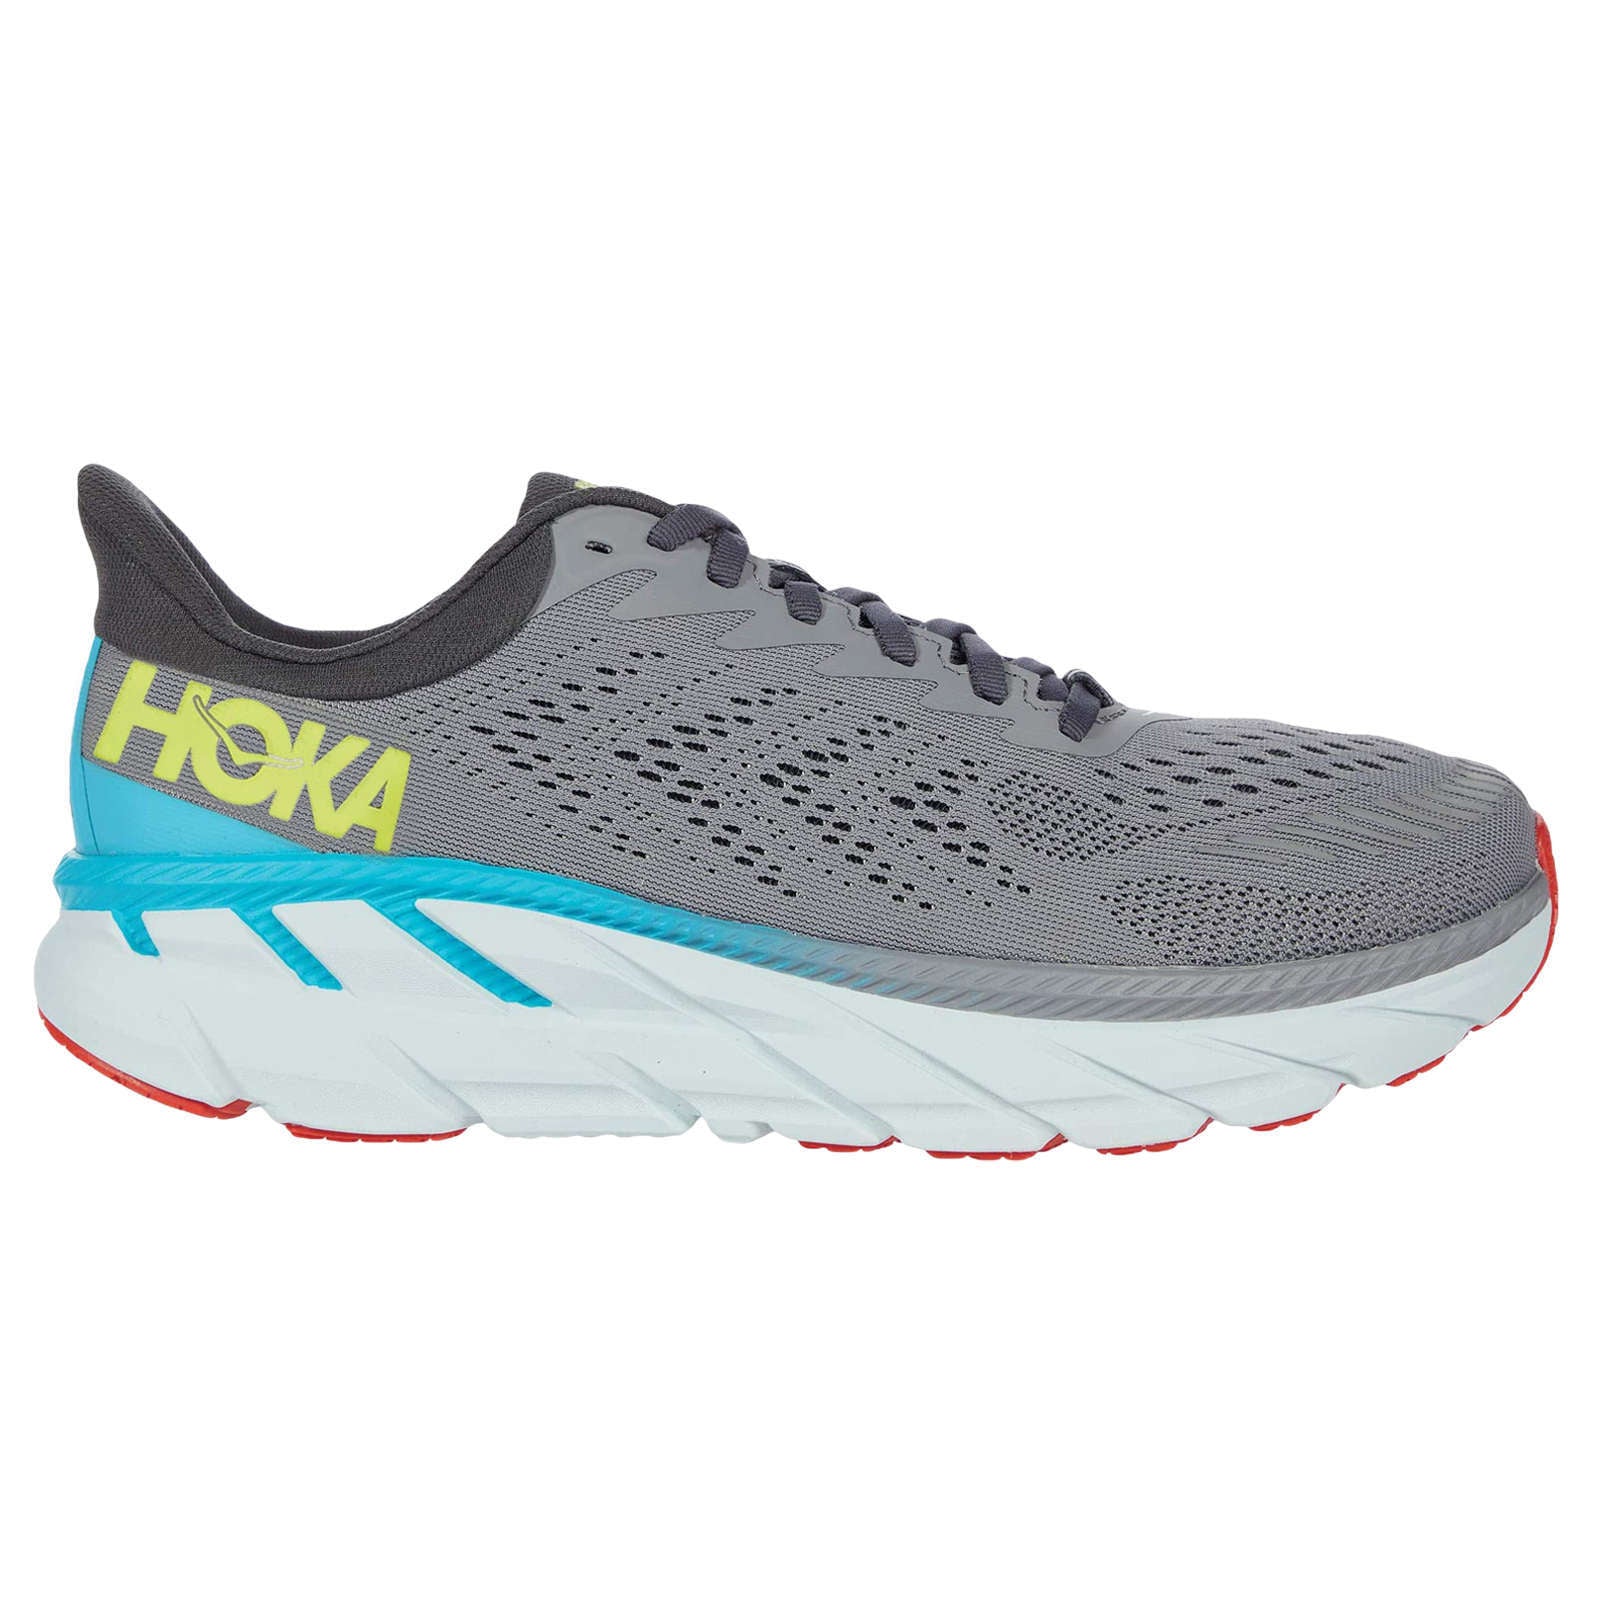 Hoka One One Clifton 7 Mesh Men's Low-Top Road Running Trainers#color_wild dove dark shadow